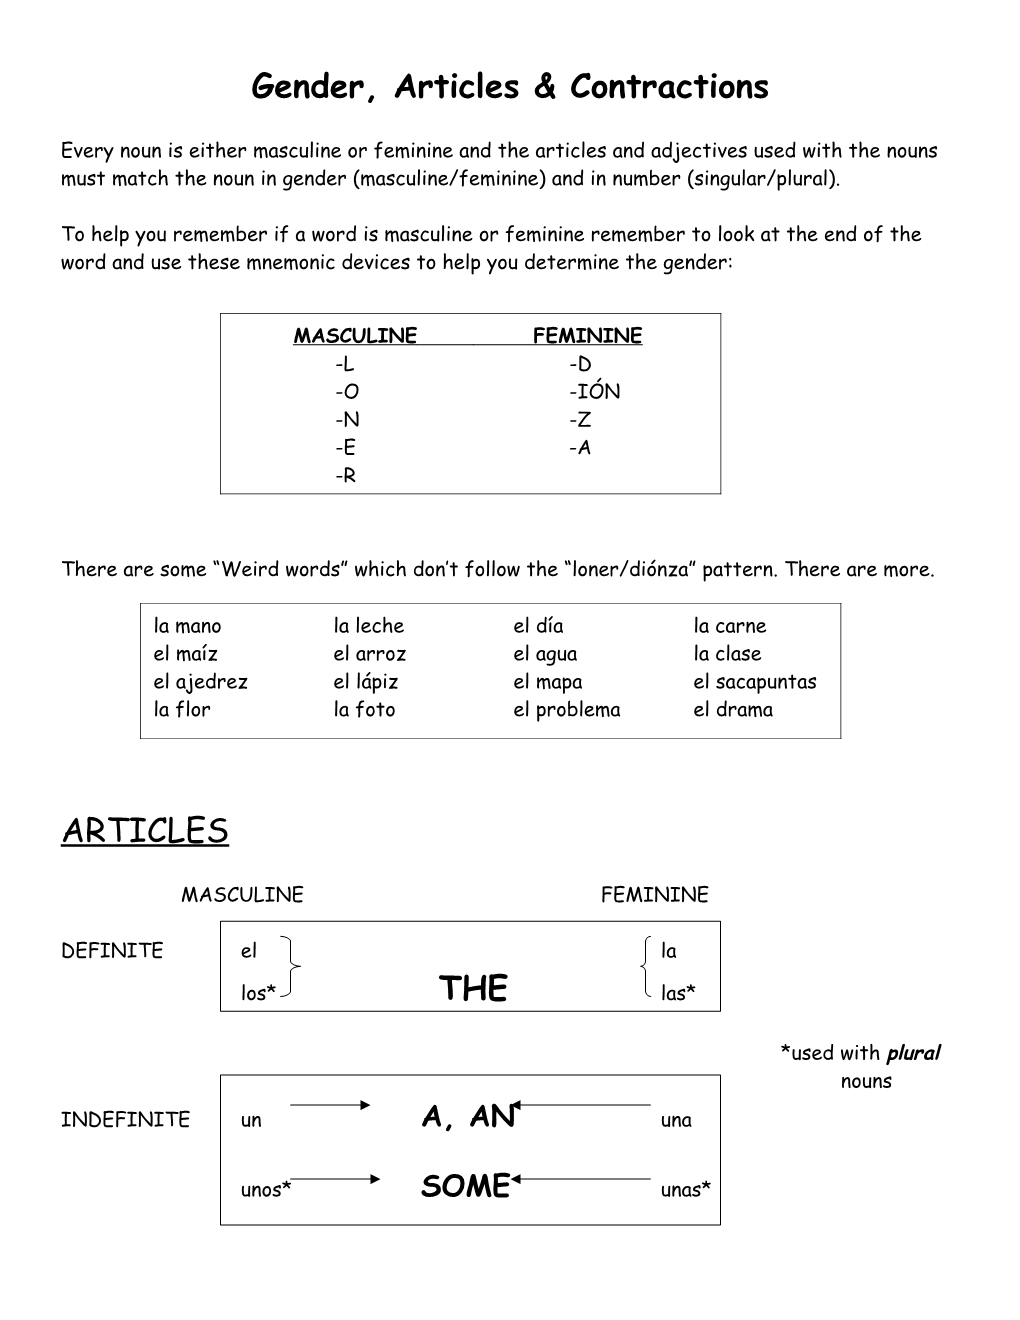 Definite Articles & Contractions